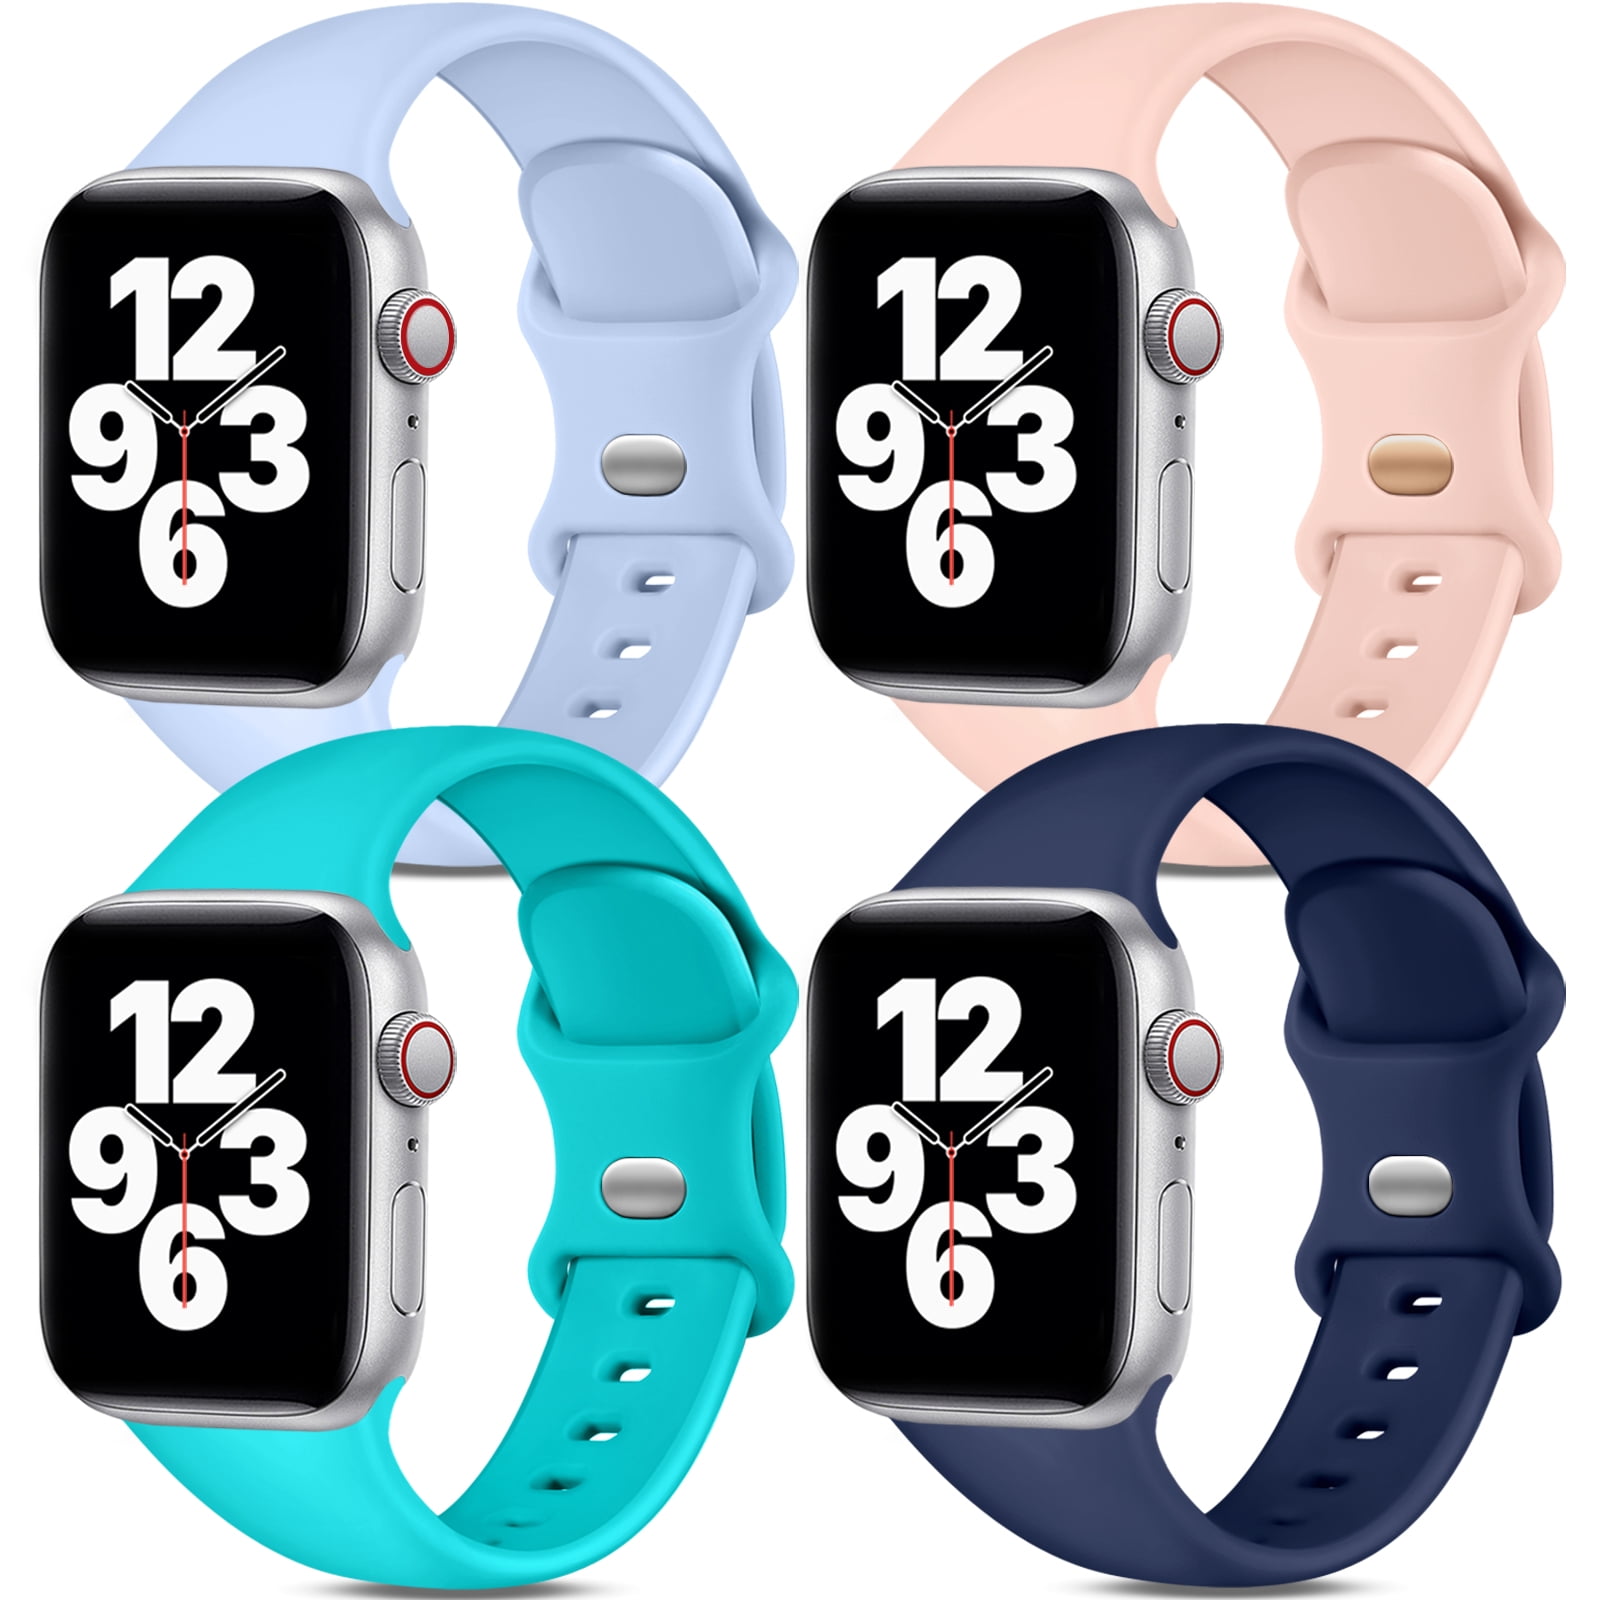 Maledan 6 Pack Silicone Apple Watch Bands